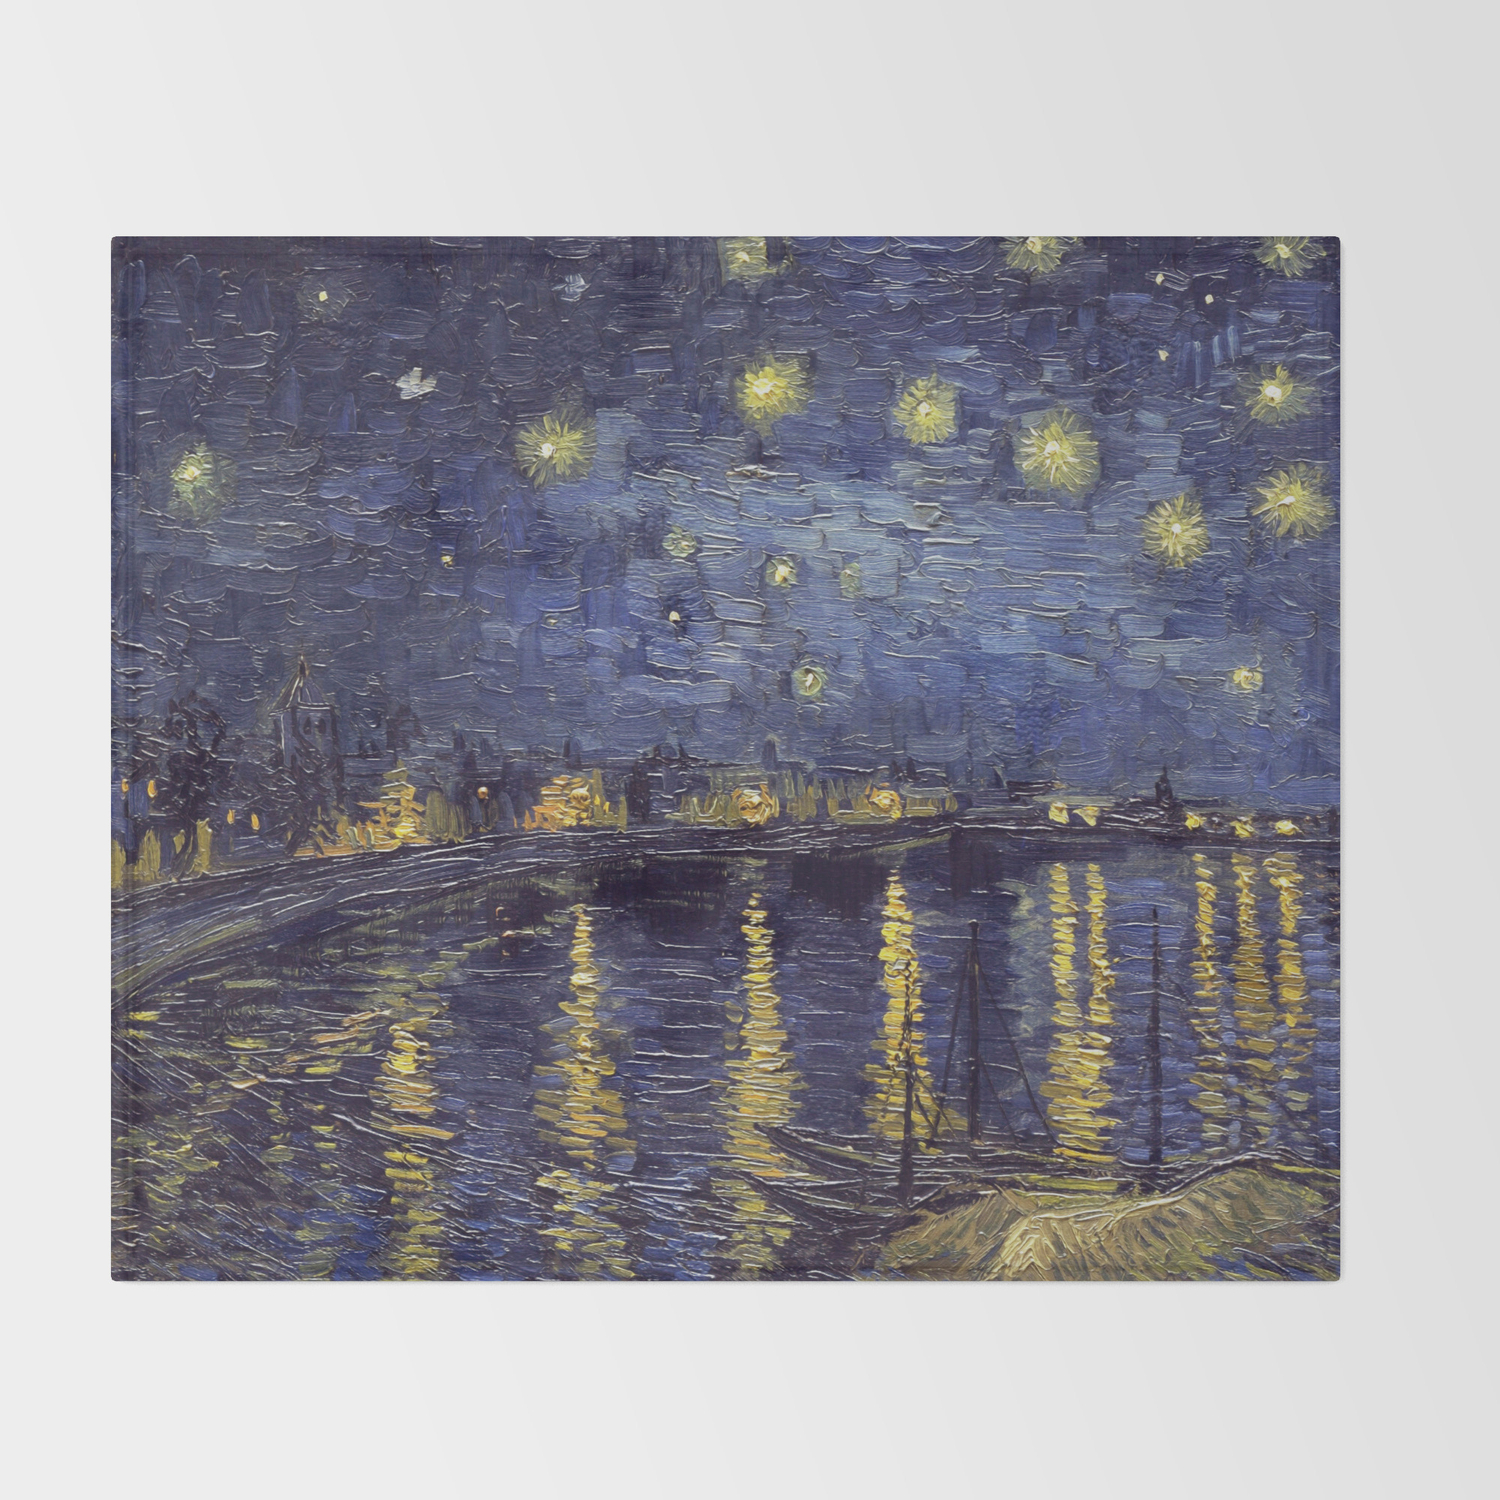 Van Gogh Starry Night Over the Rhone Pillow Cushion Cover Home Decor 100% Cotton 